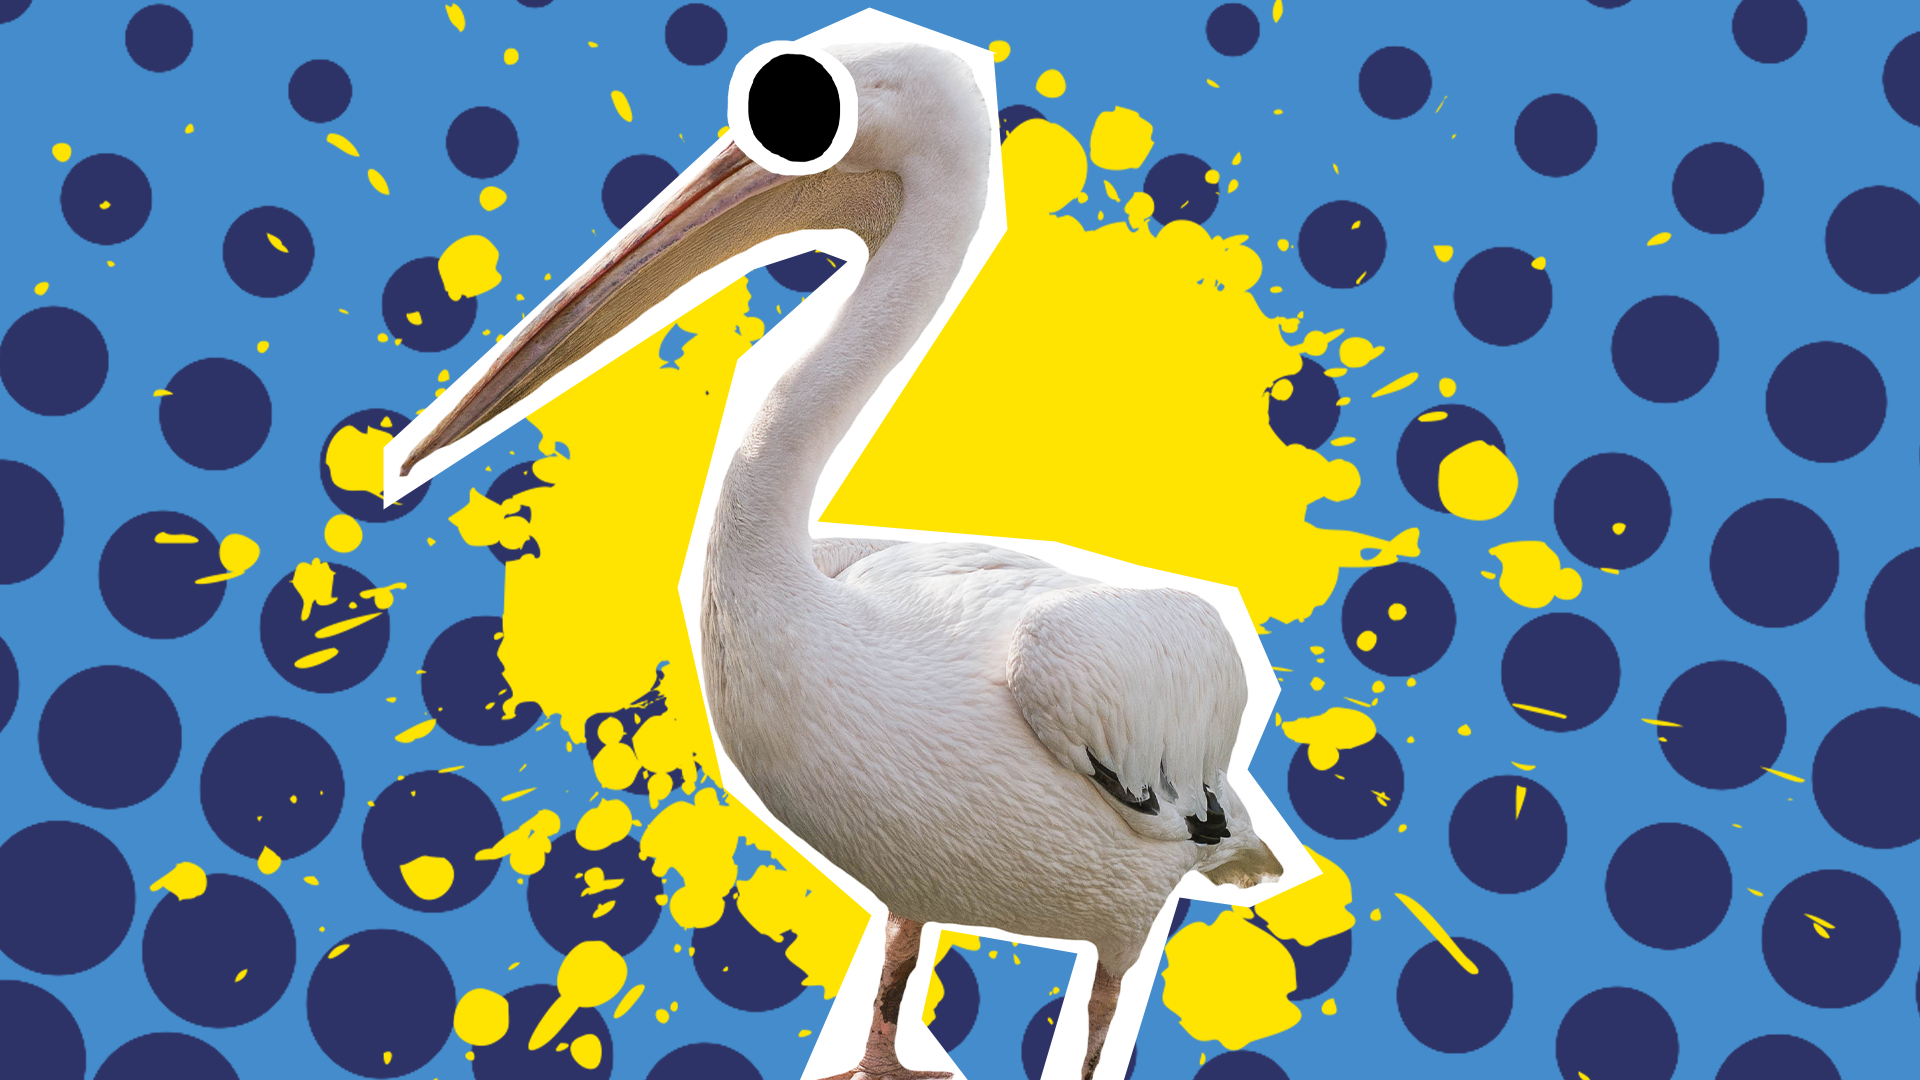 Pelican with yellow splat on blue background